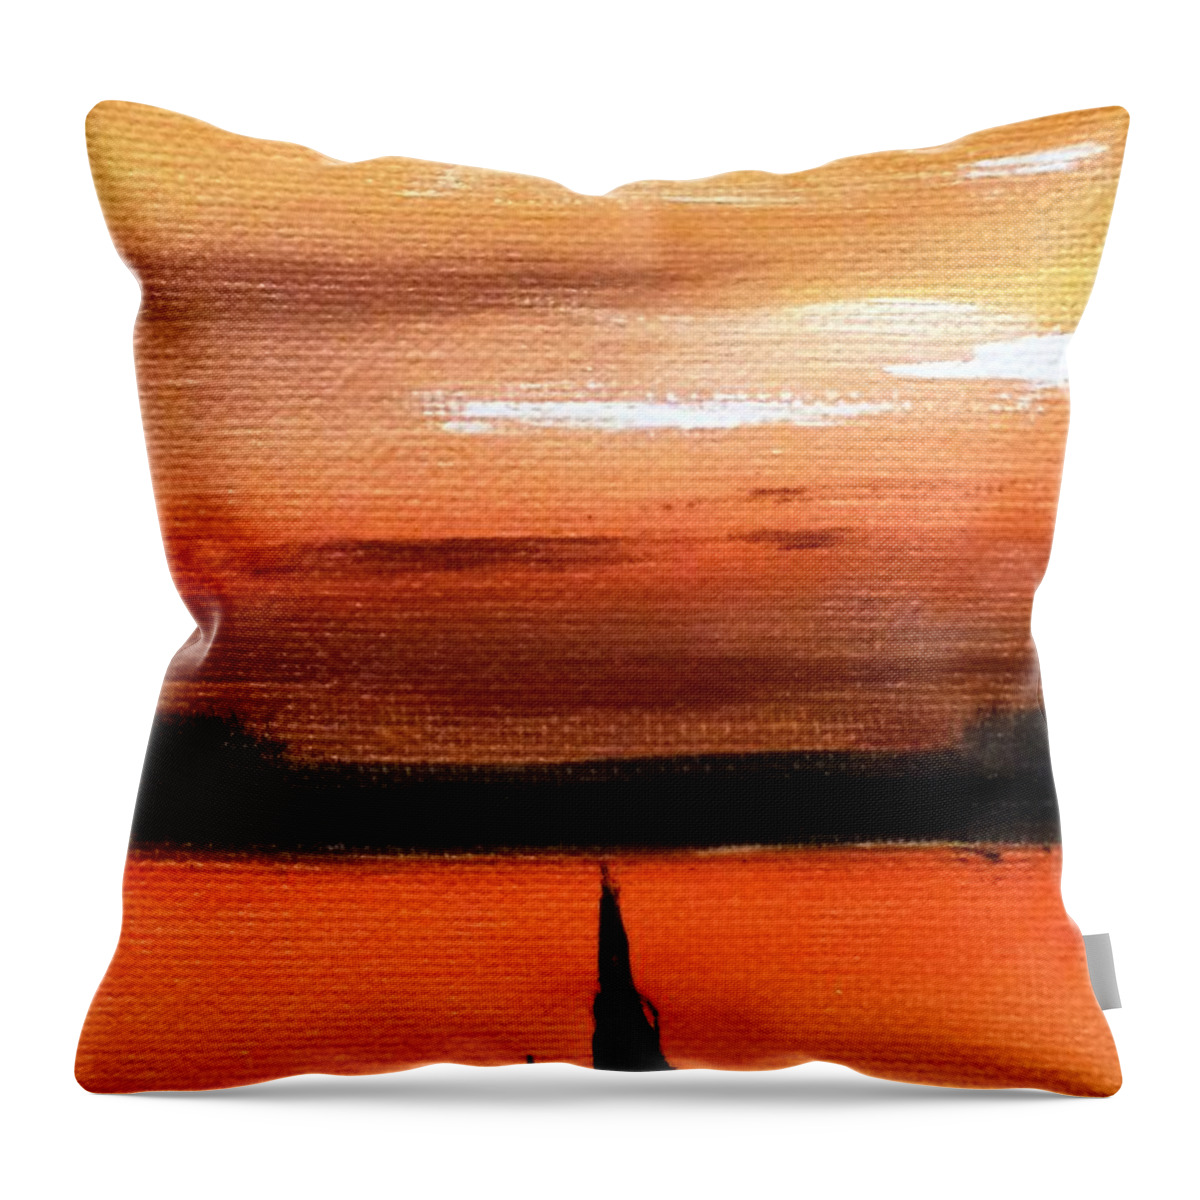 Boat Throw Pillow featuring the painting Sunset Boat by Amalia Suruceanu